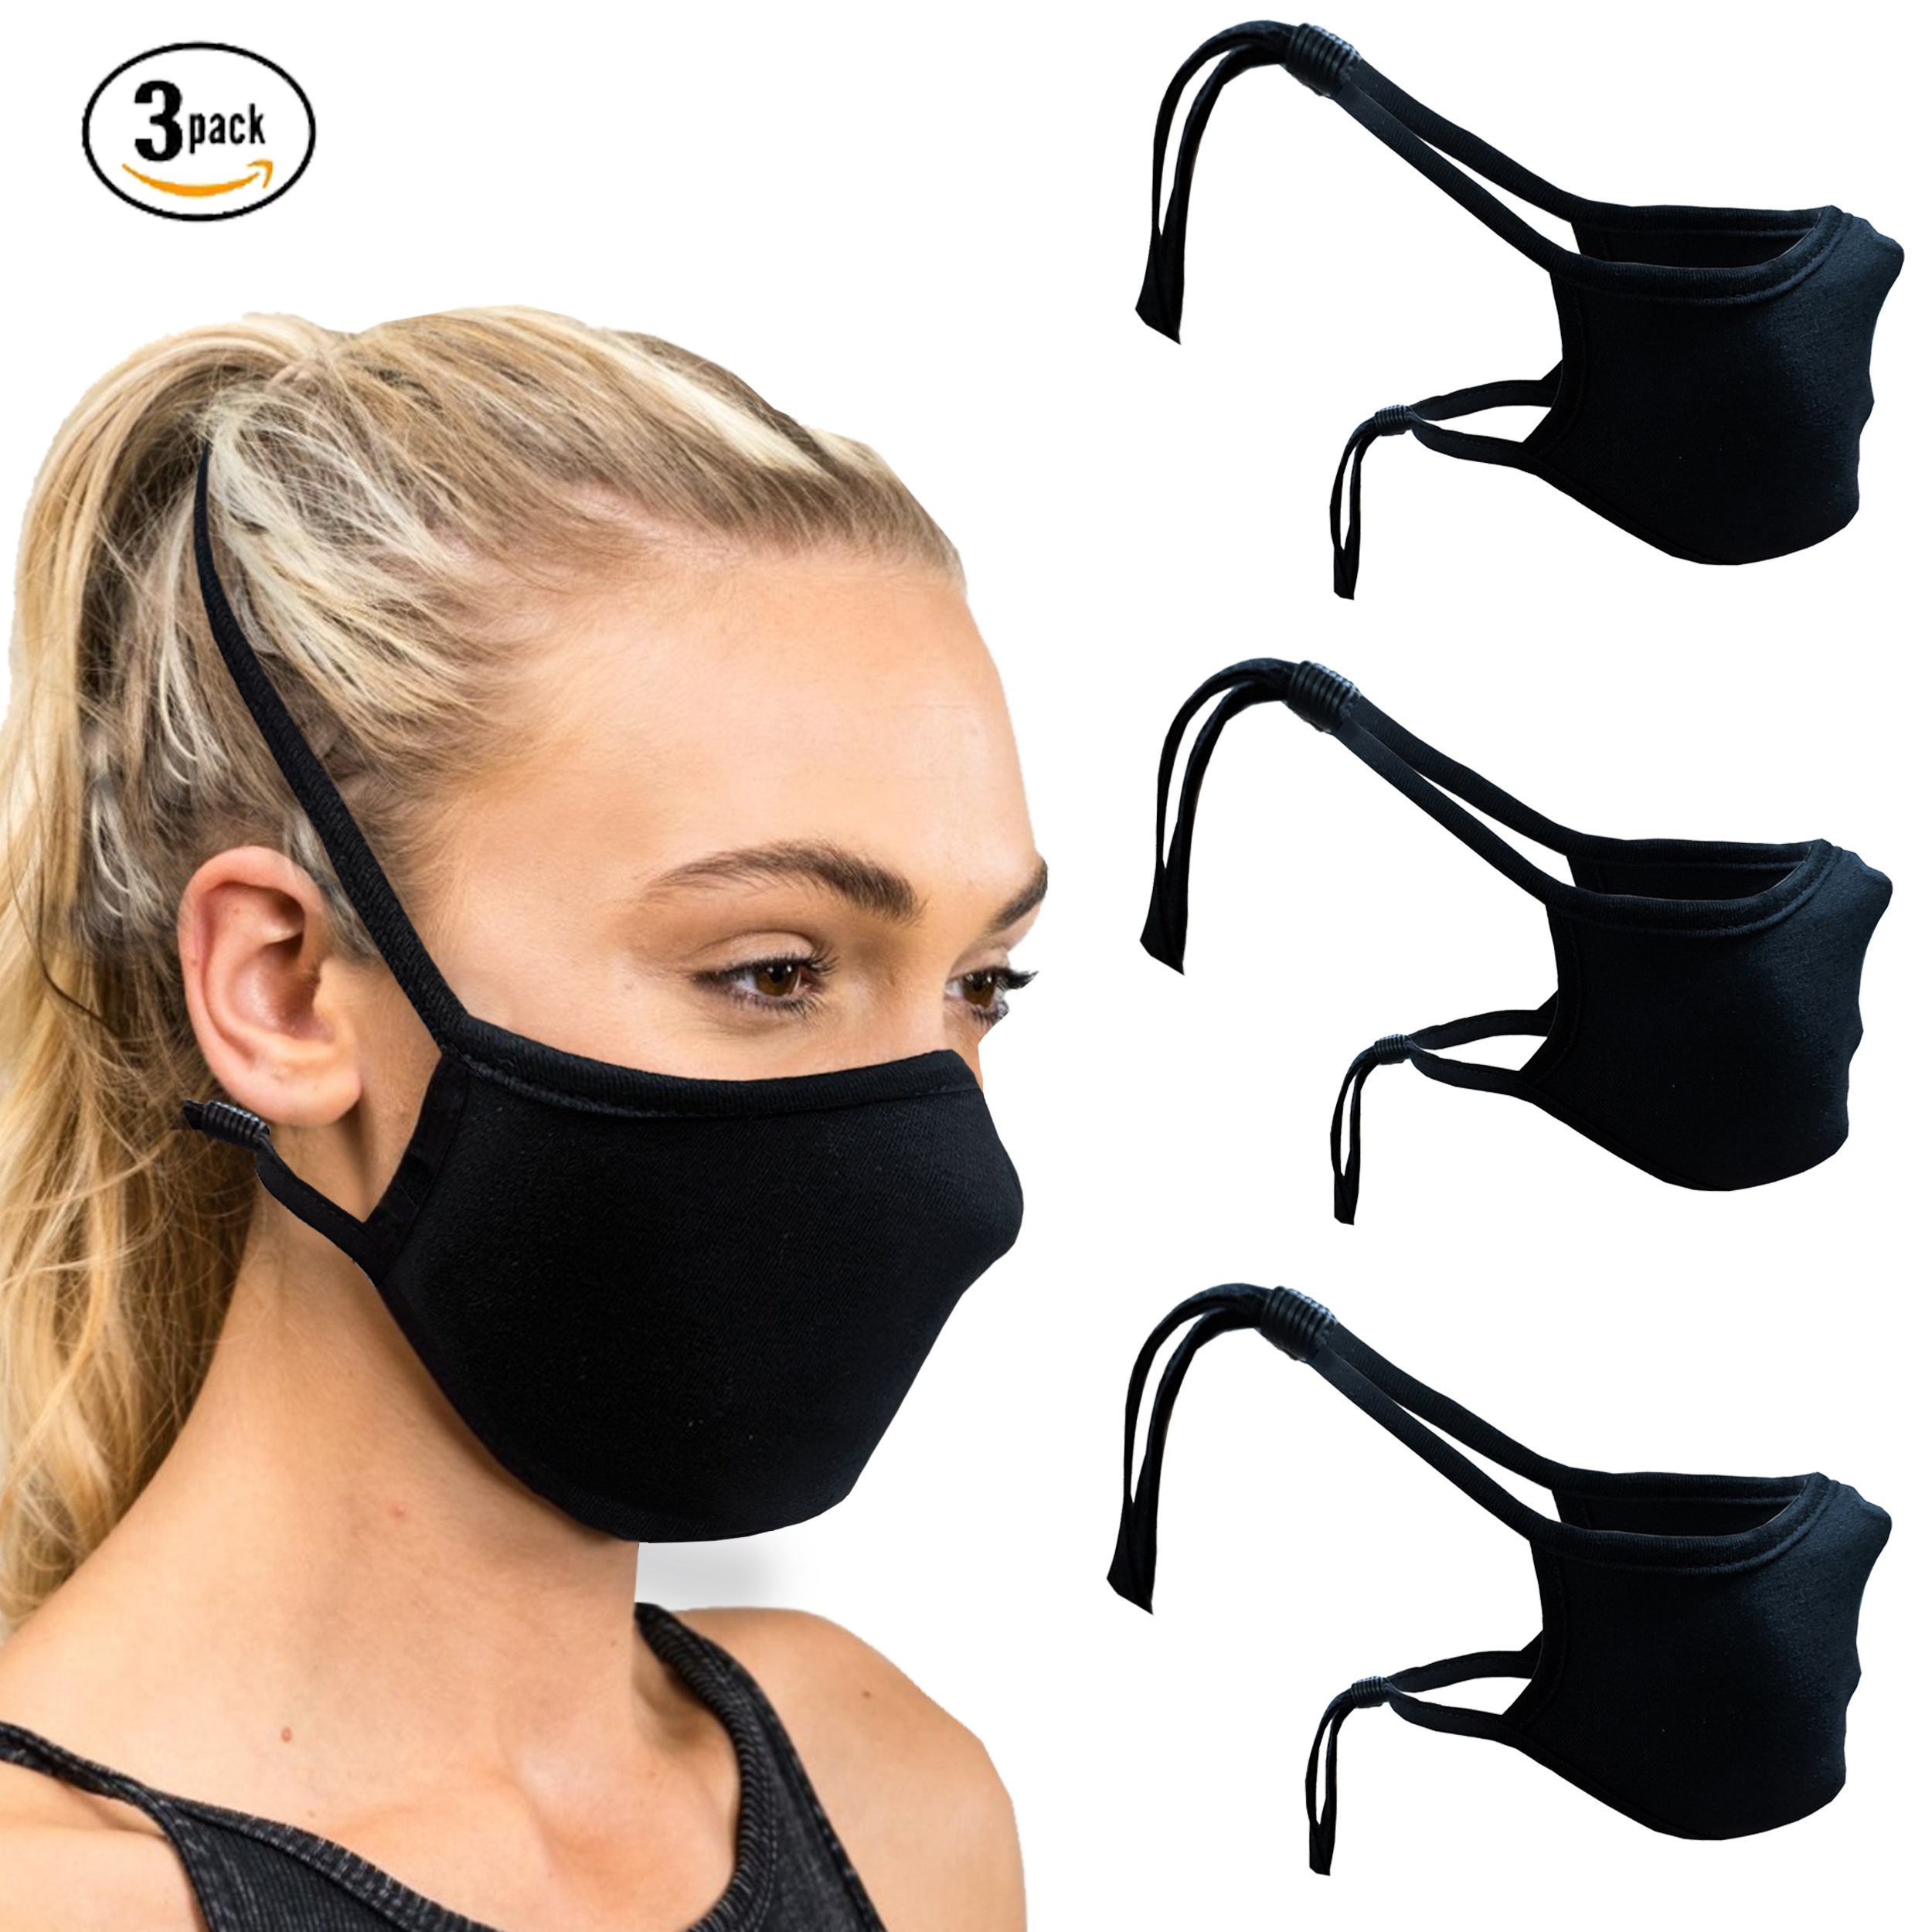 The Clash London Calling Unisex Reusable Nose Mouth Face Cover with Adjustable Earloops Fashion Face Bandanas